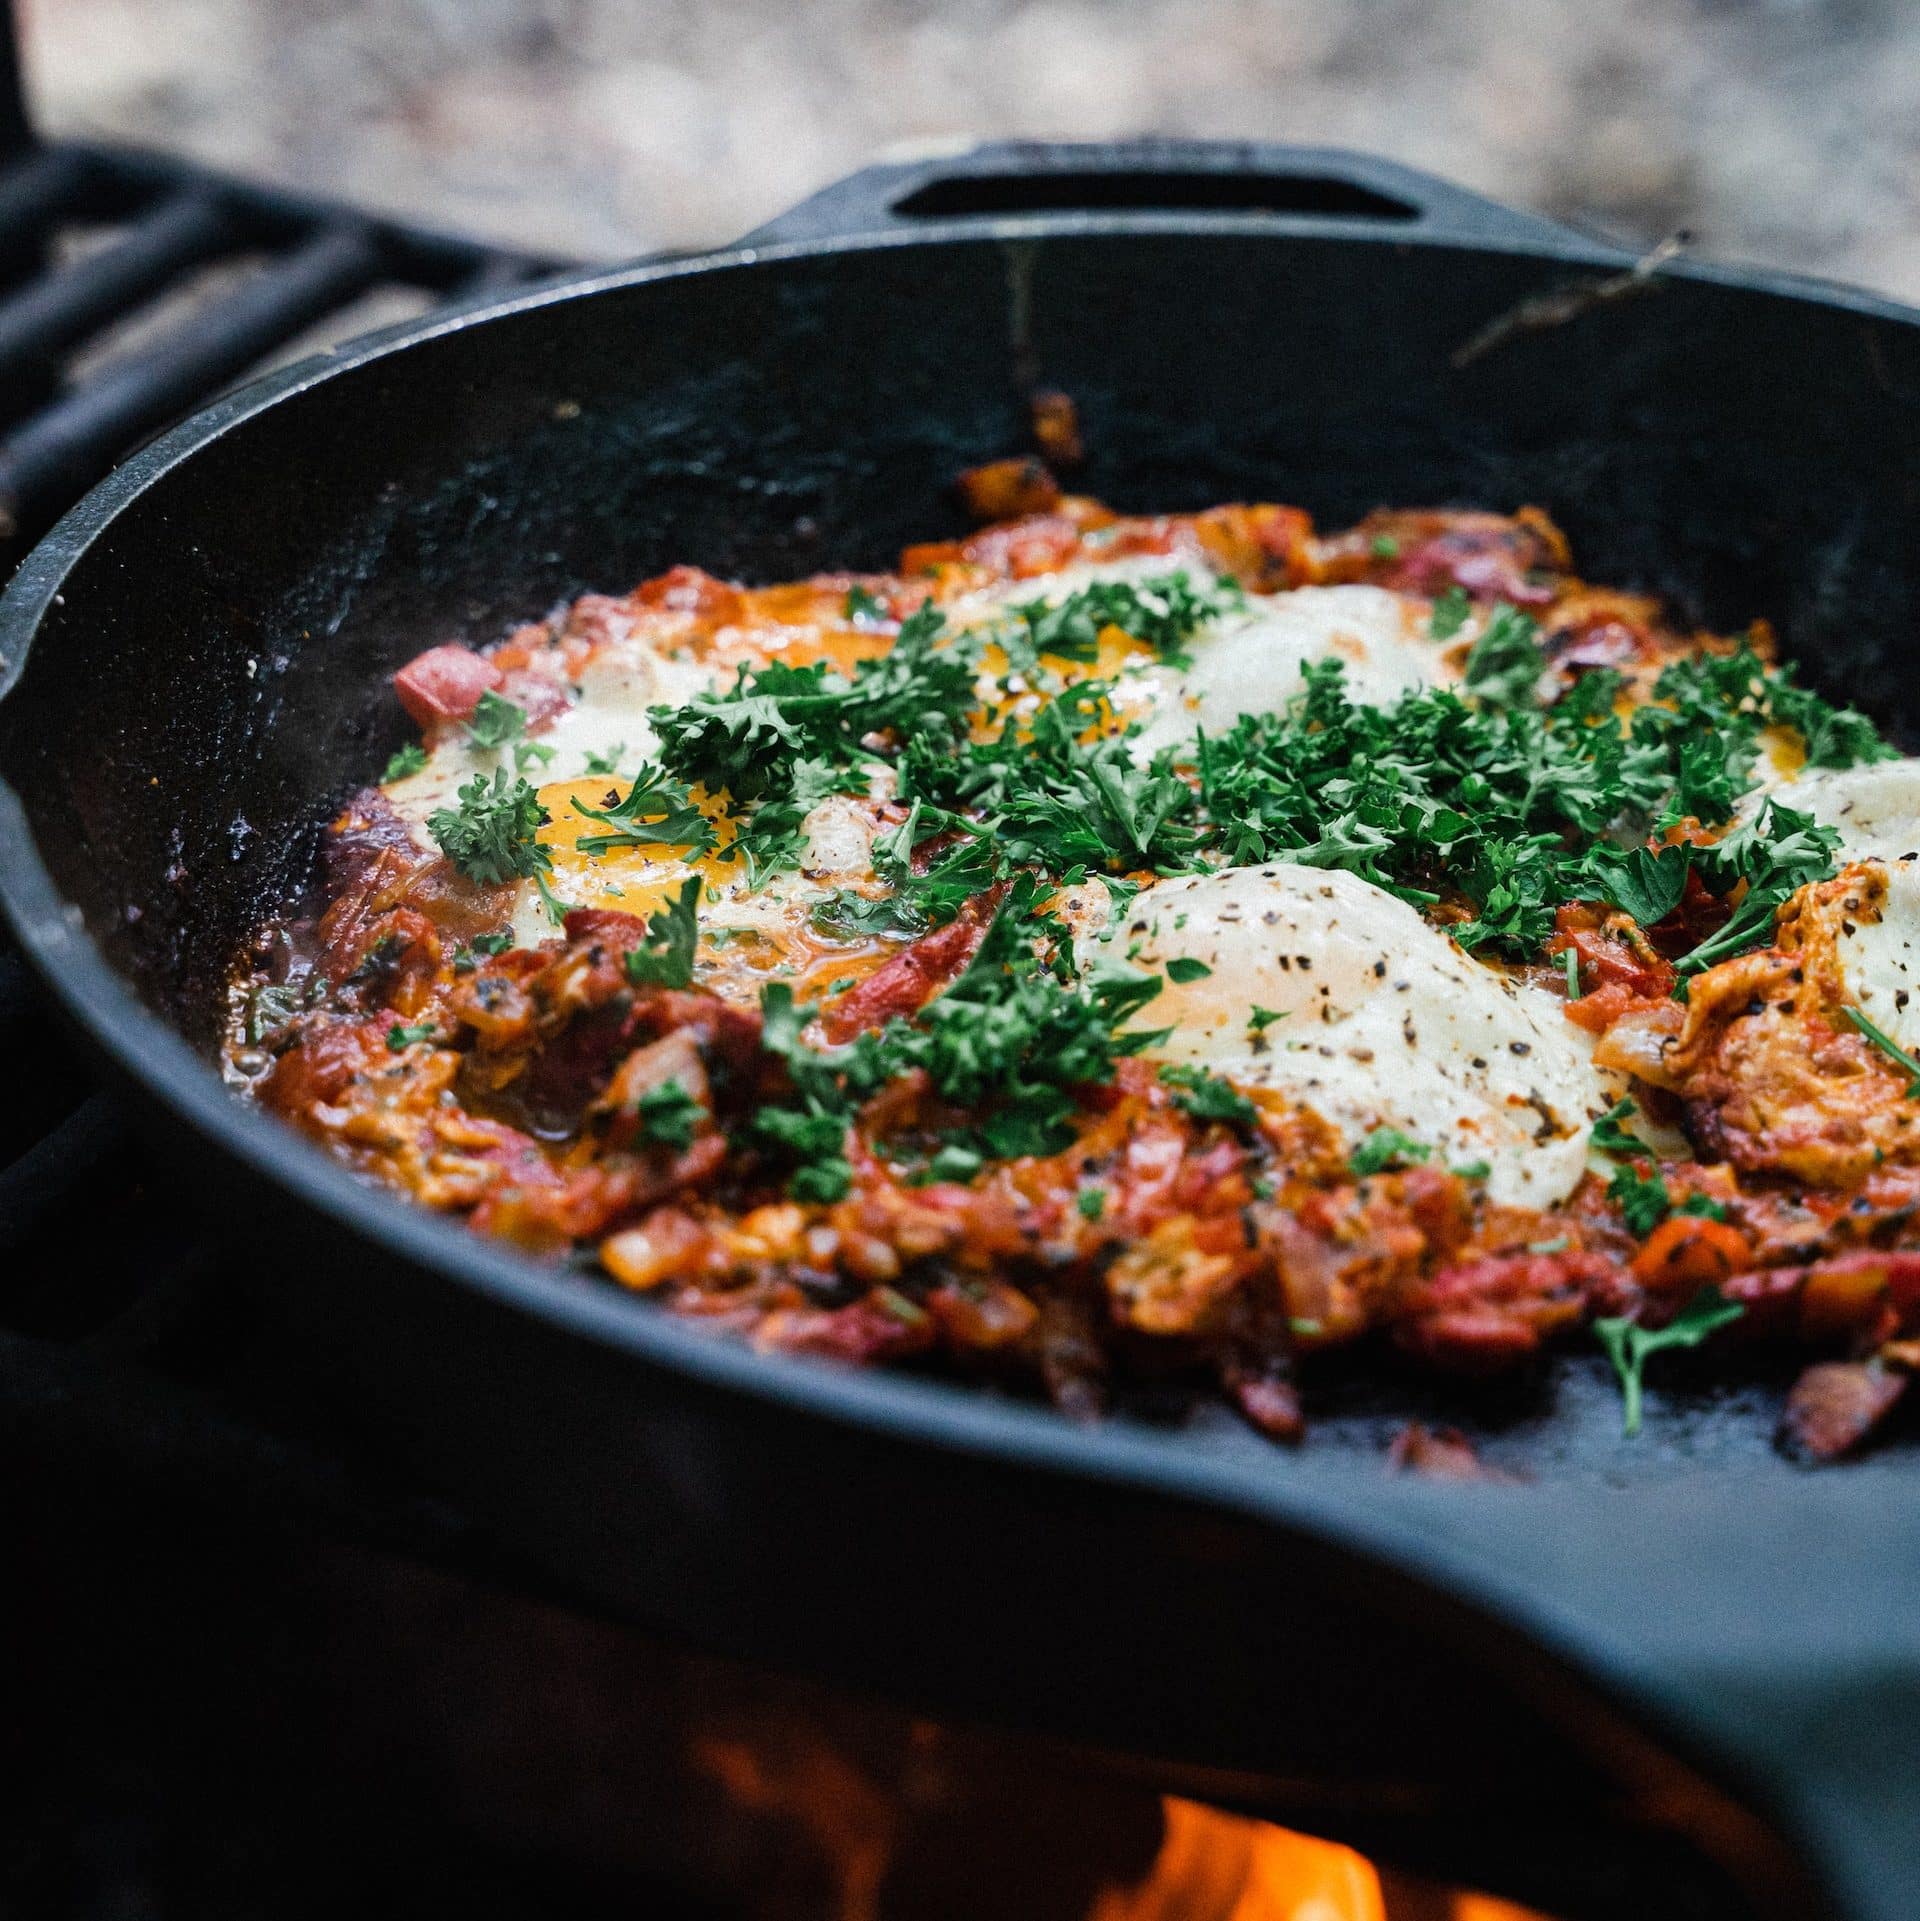 Cast iron skillet cooking food over campfire